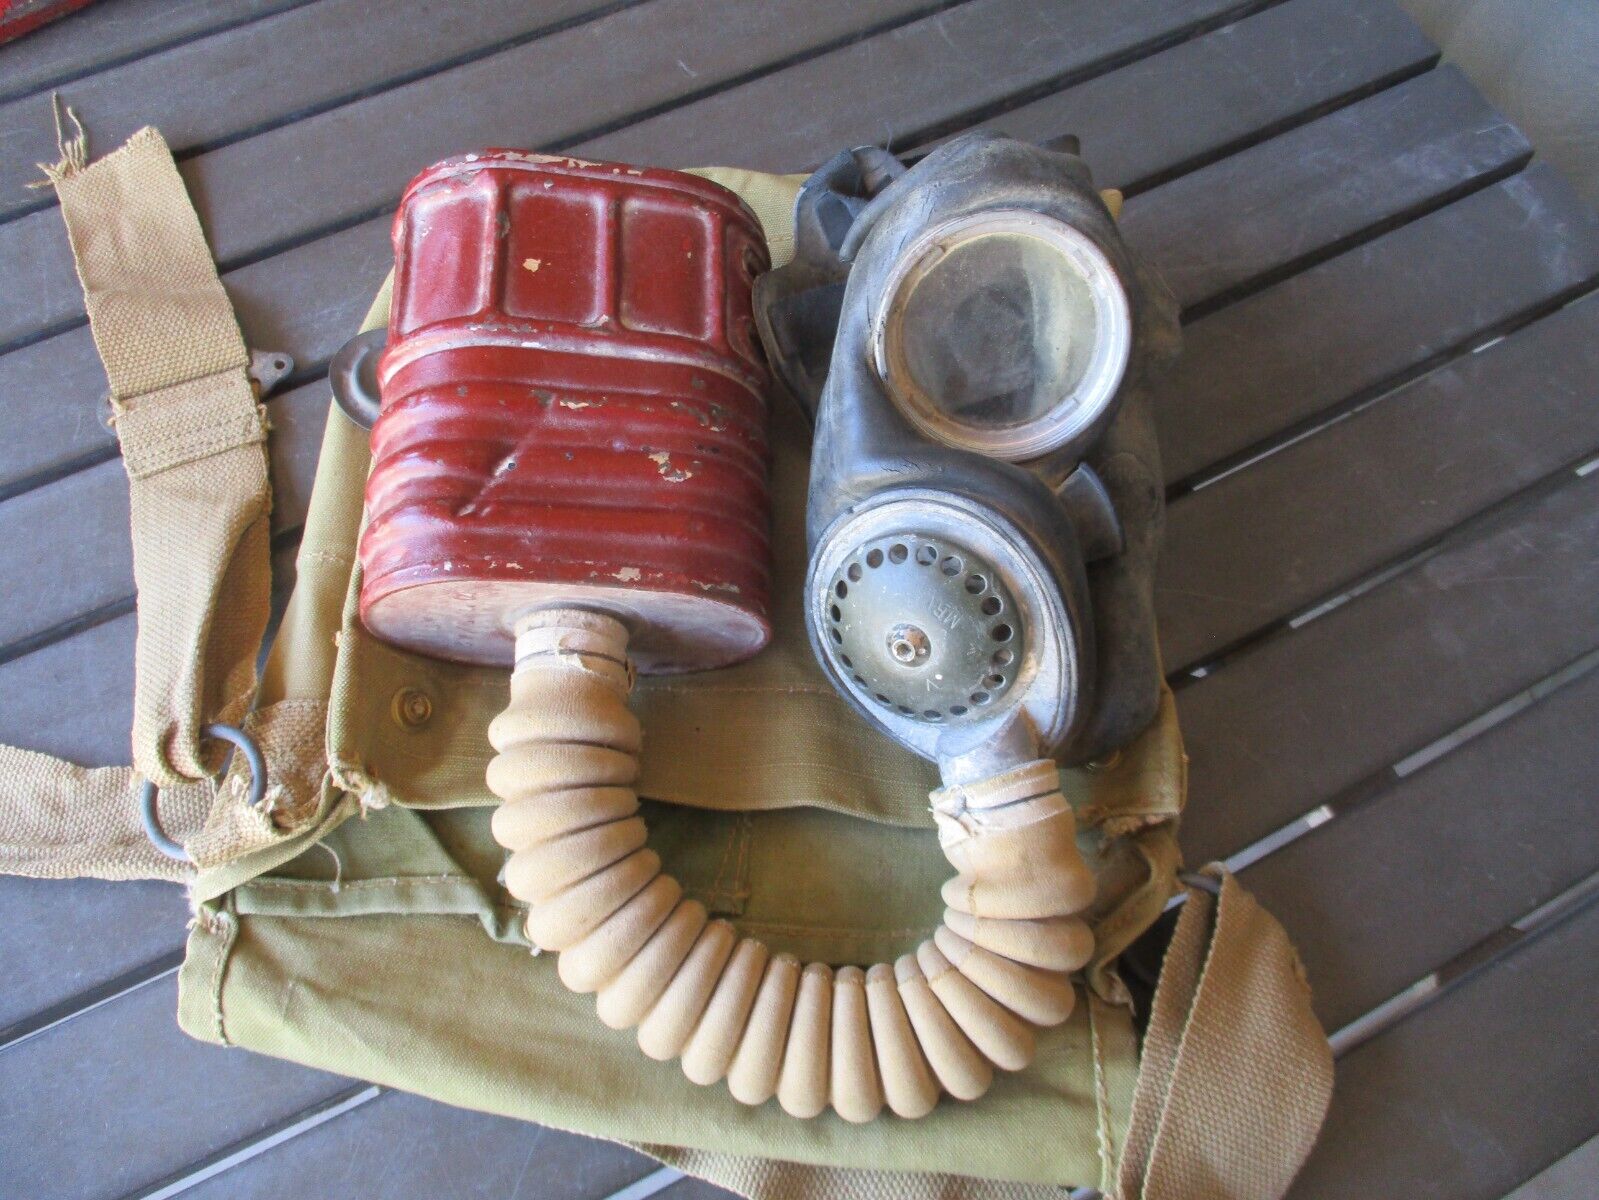 1942 dated, WWII British Avon Mask with Carry Bag